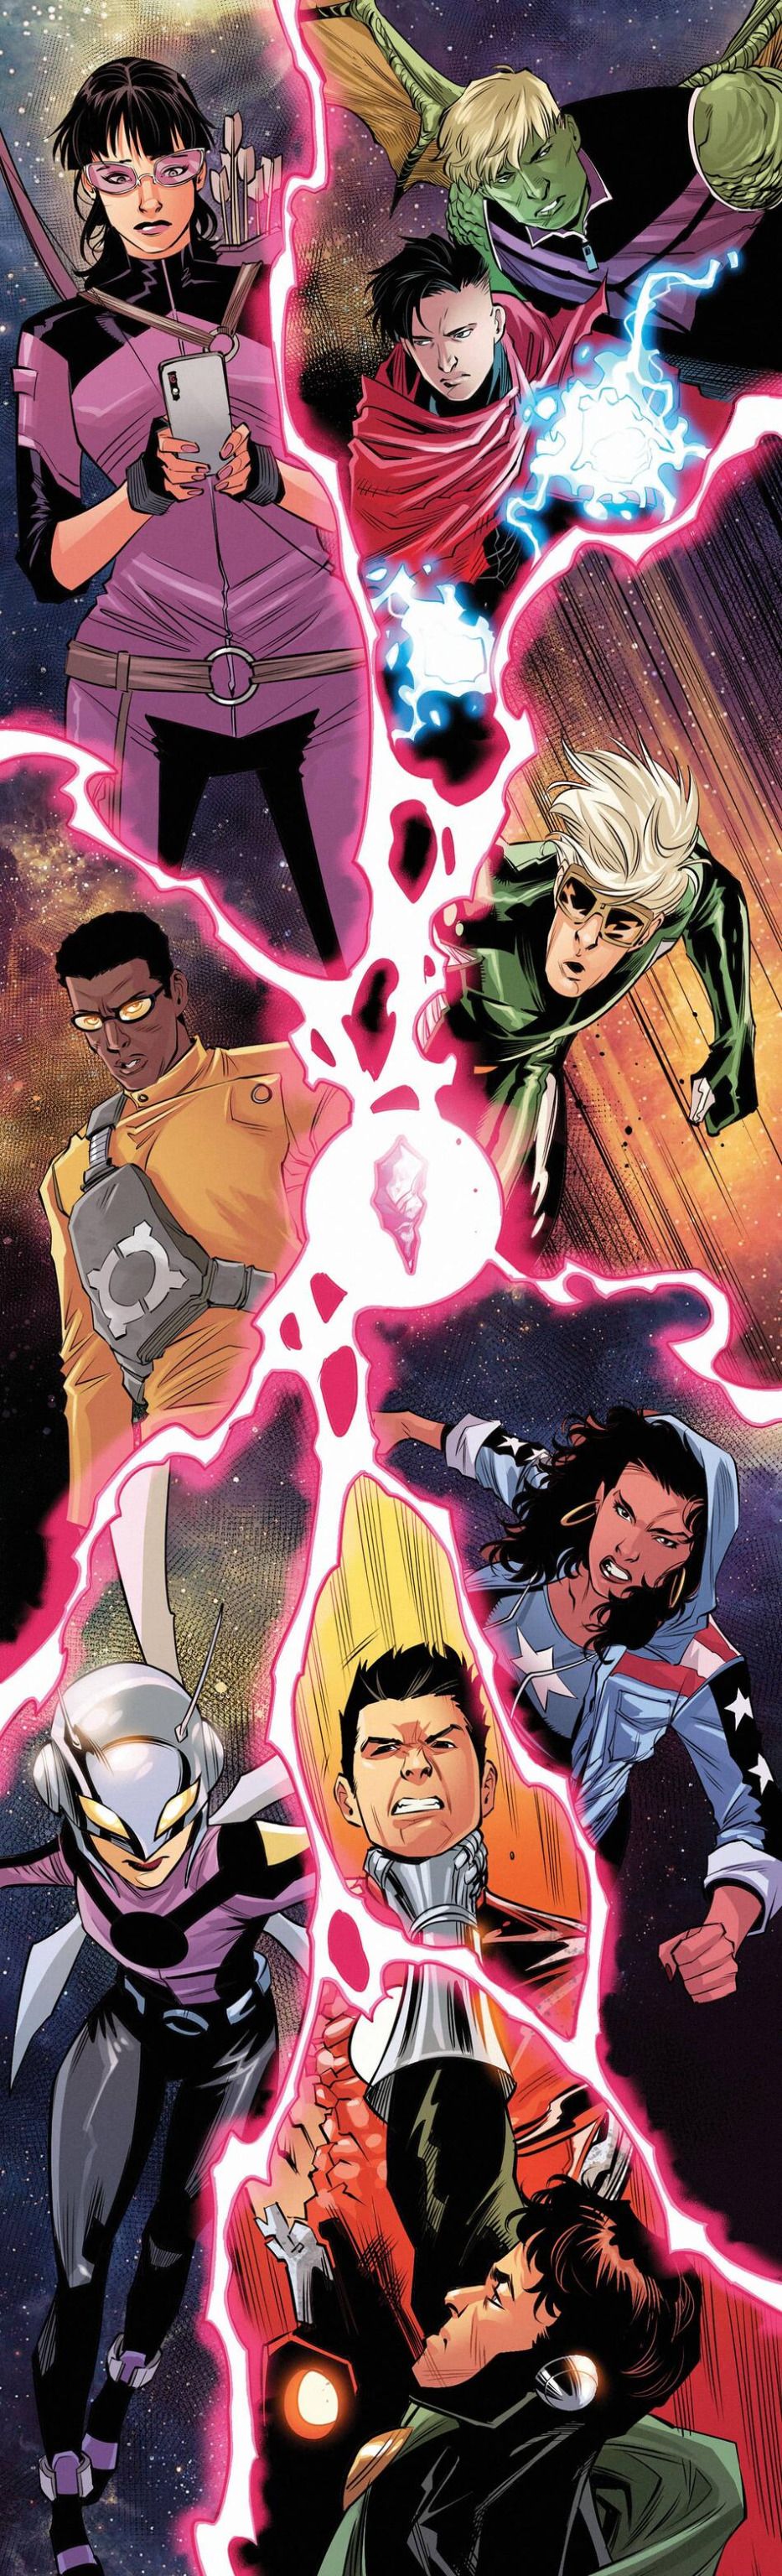 The Young Avengers as depicted in Marvel's Voices: Young Avnegers Infinity Comic.